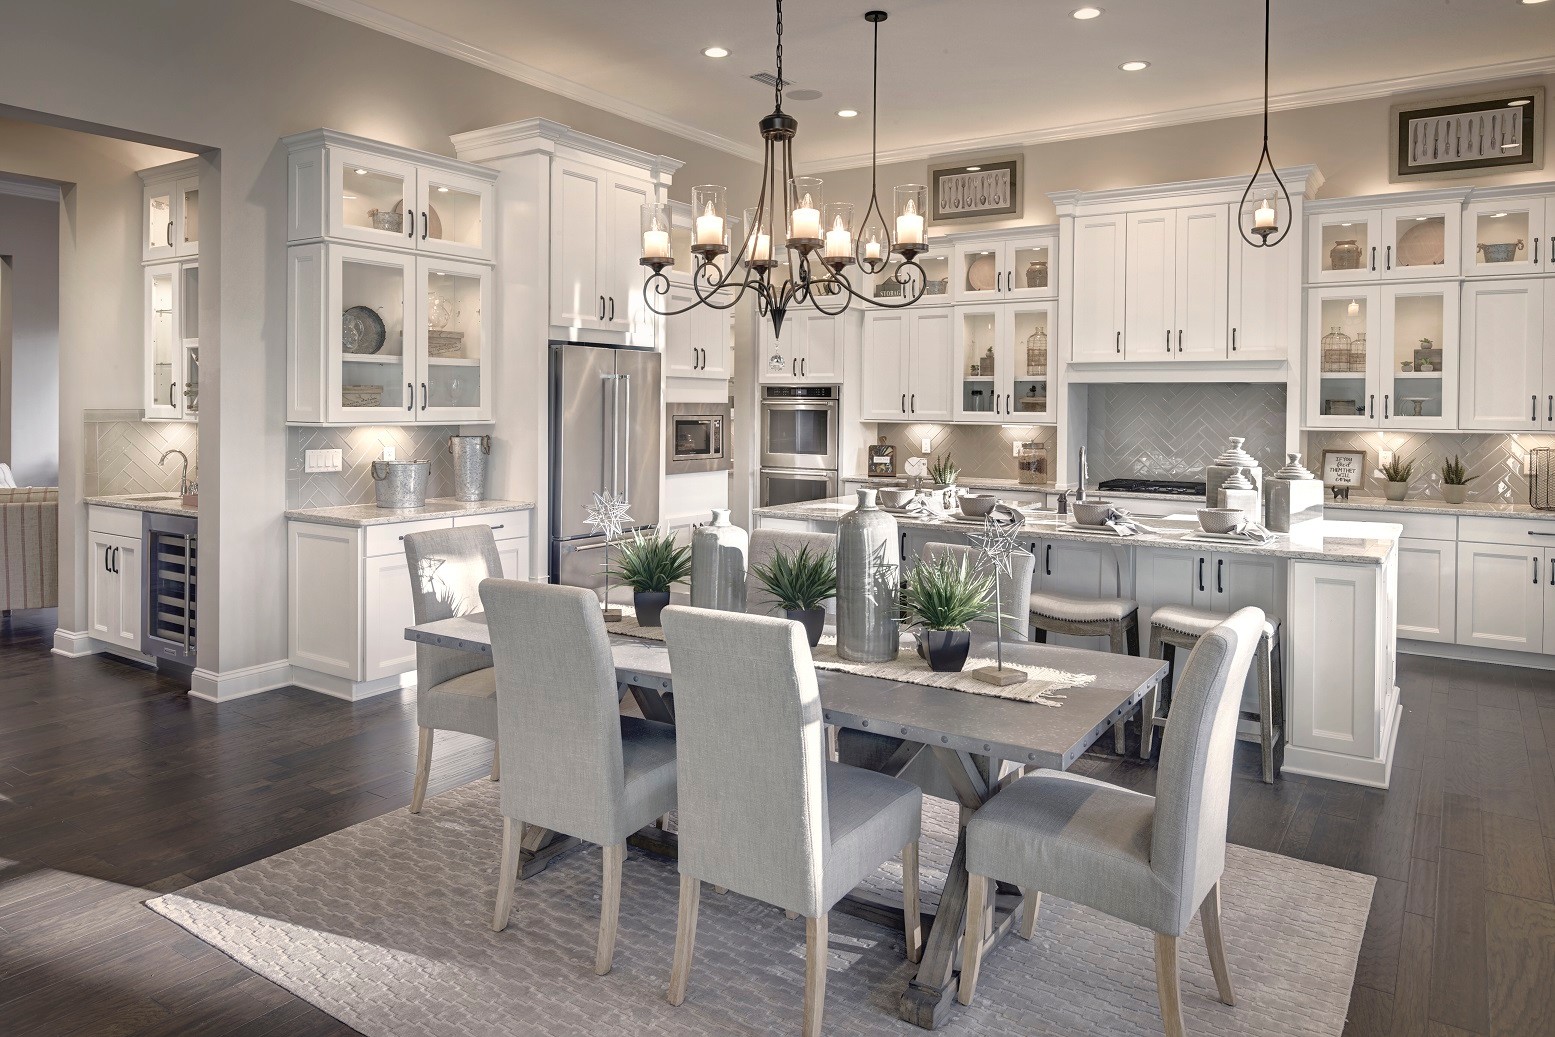 The Iris model home has 3,390 square feet of living space.